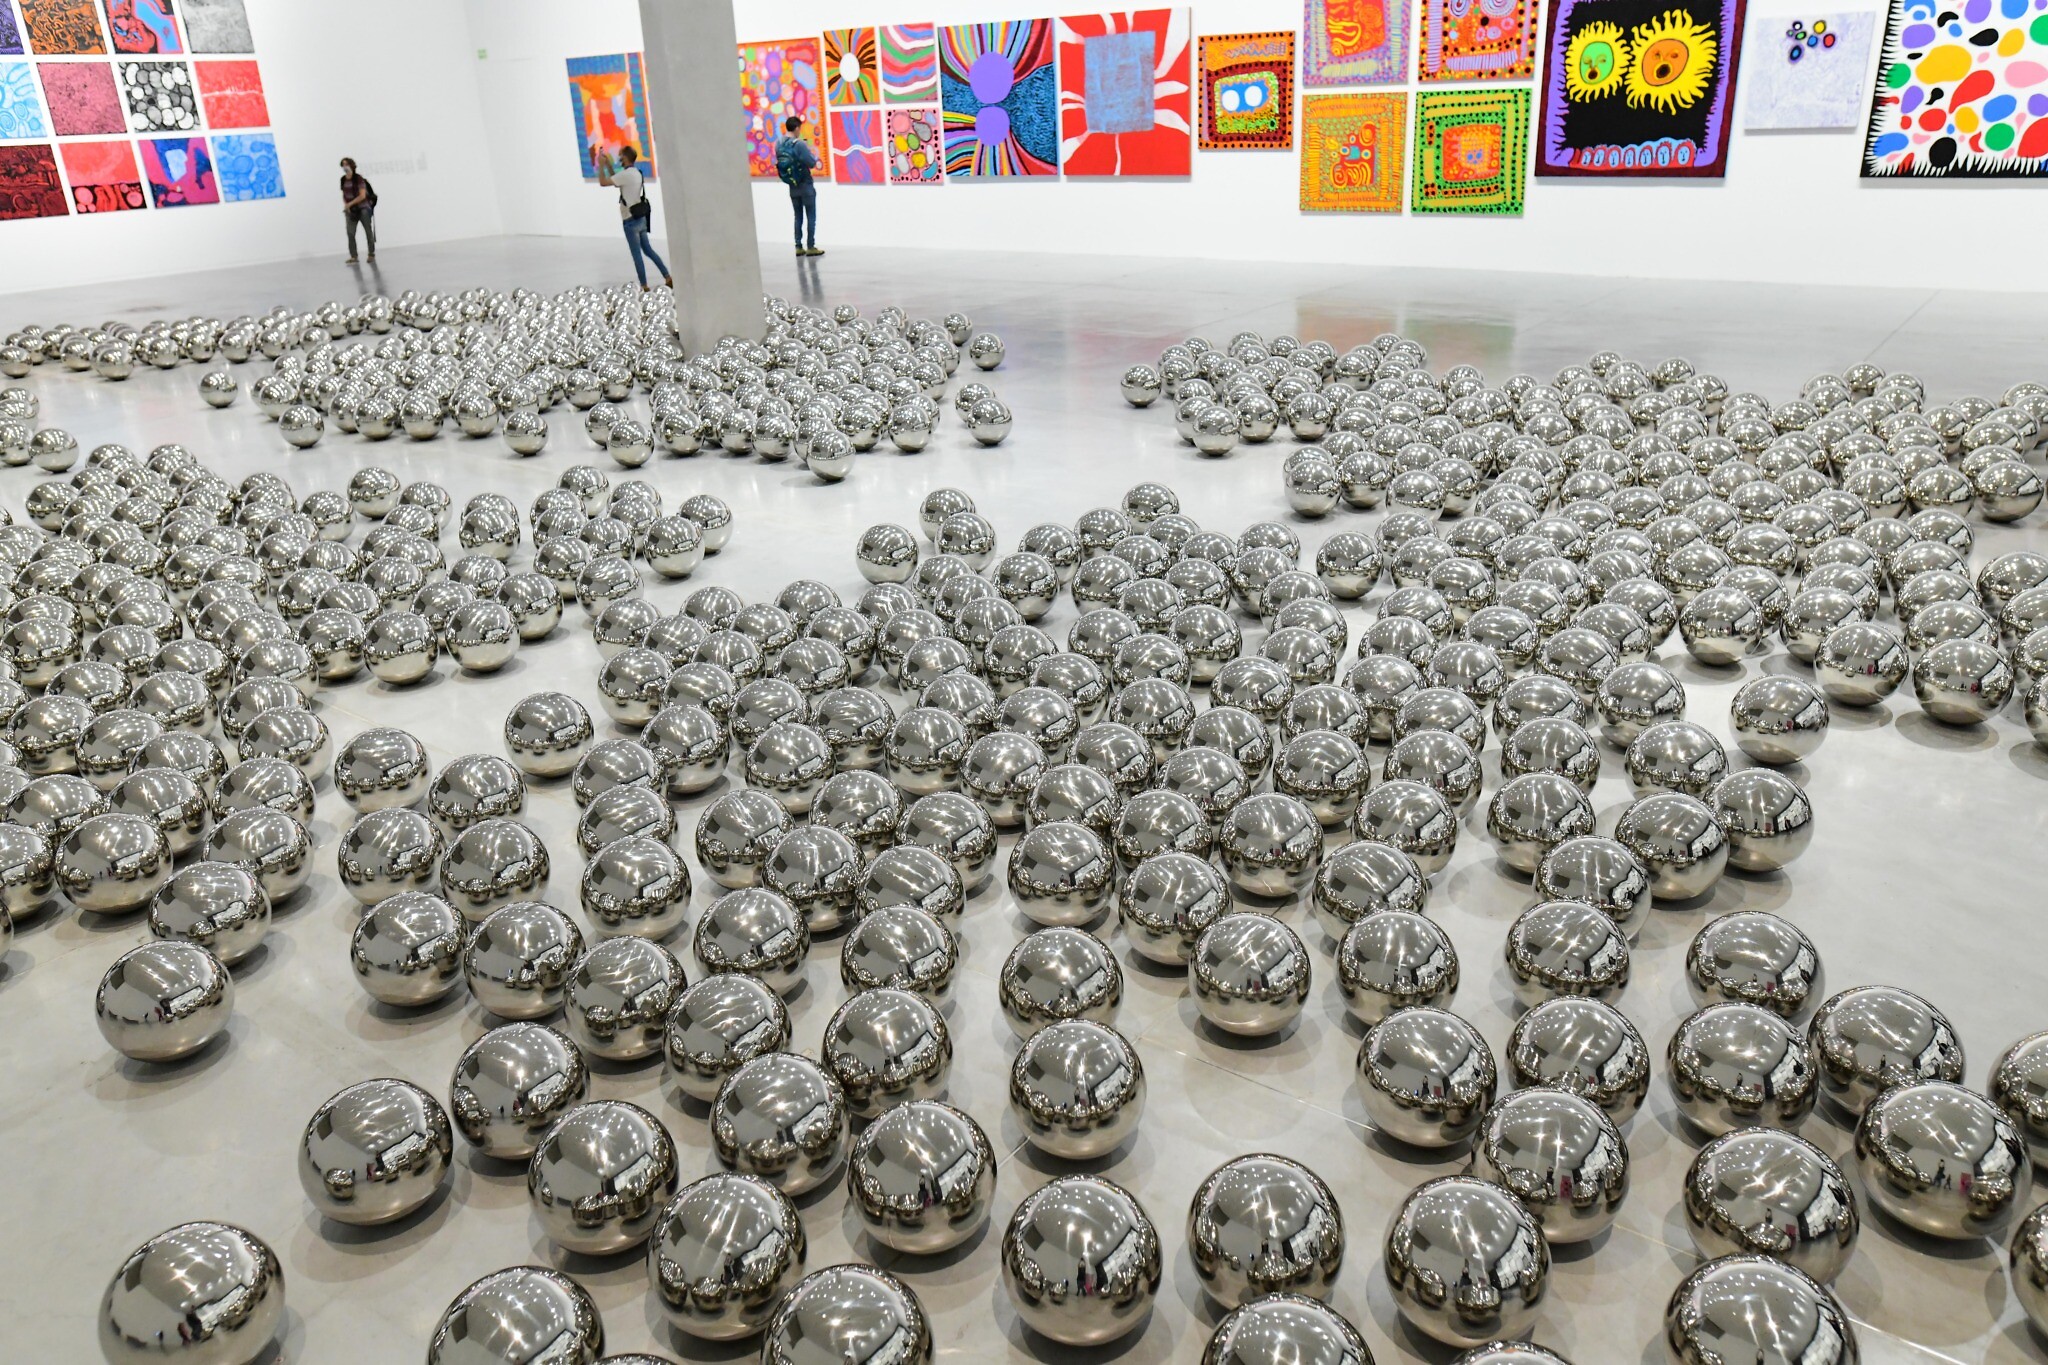 The New York Times previews the Yayoi Kusama Museum in Tokyo